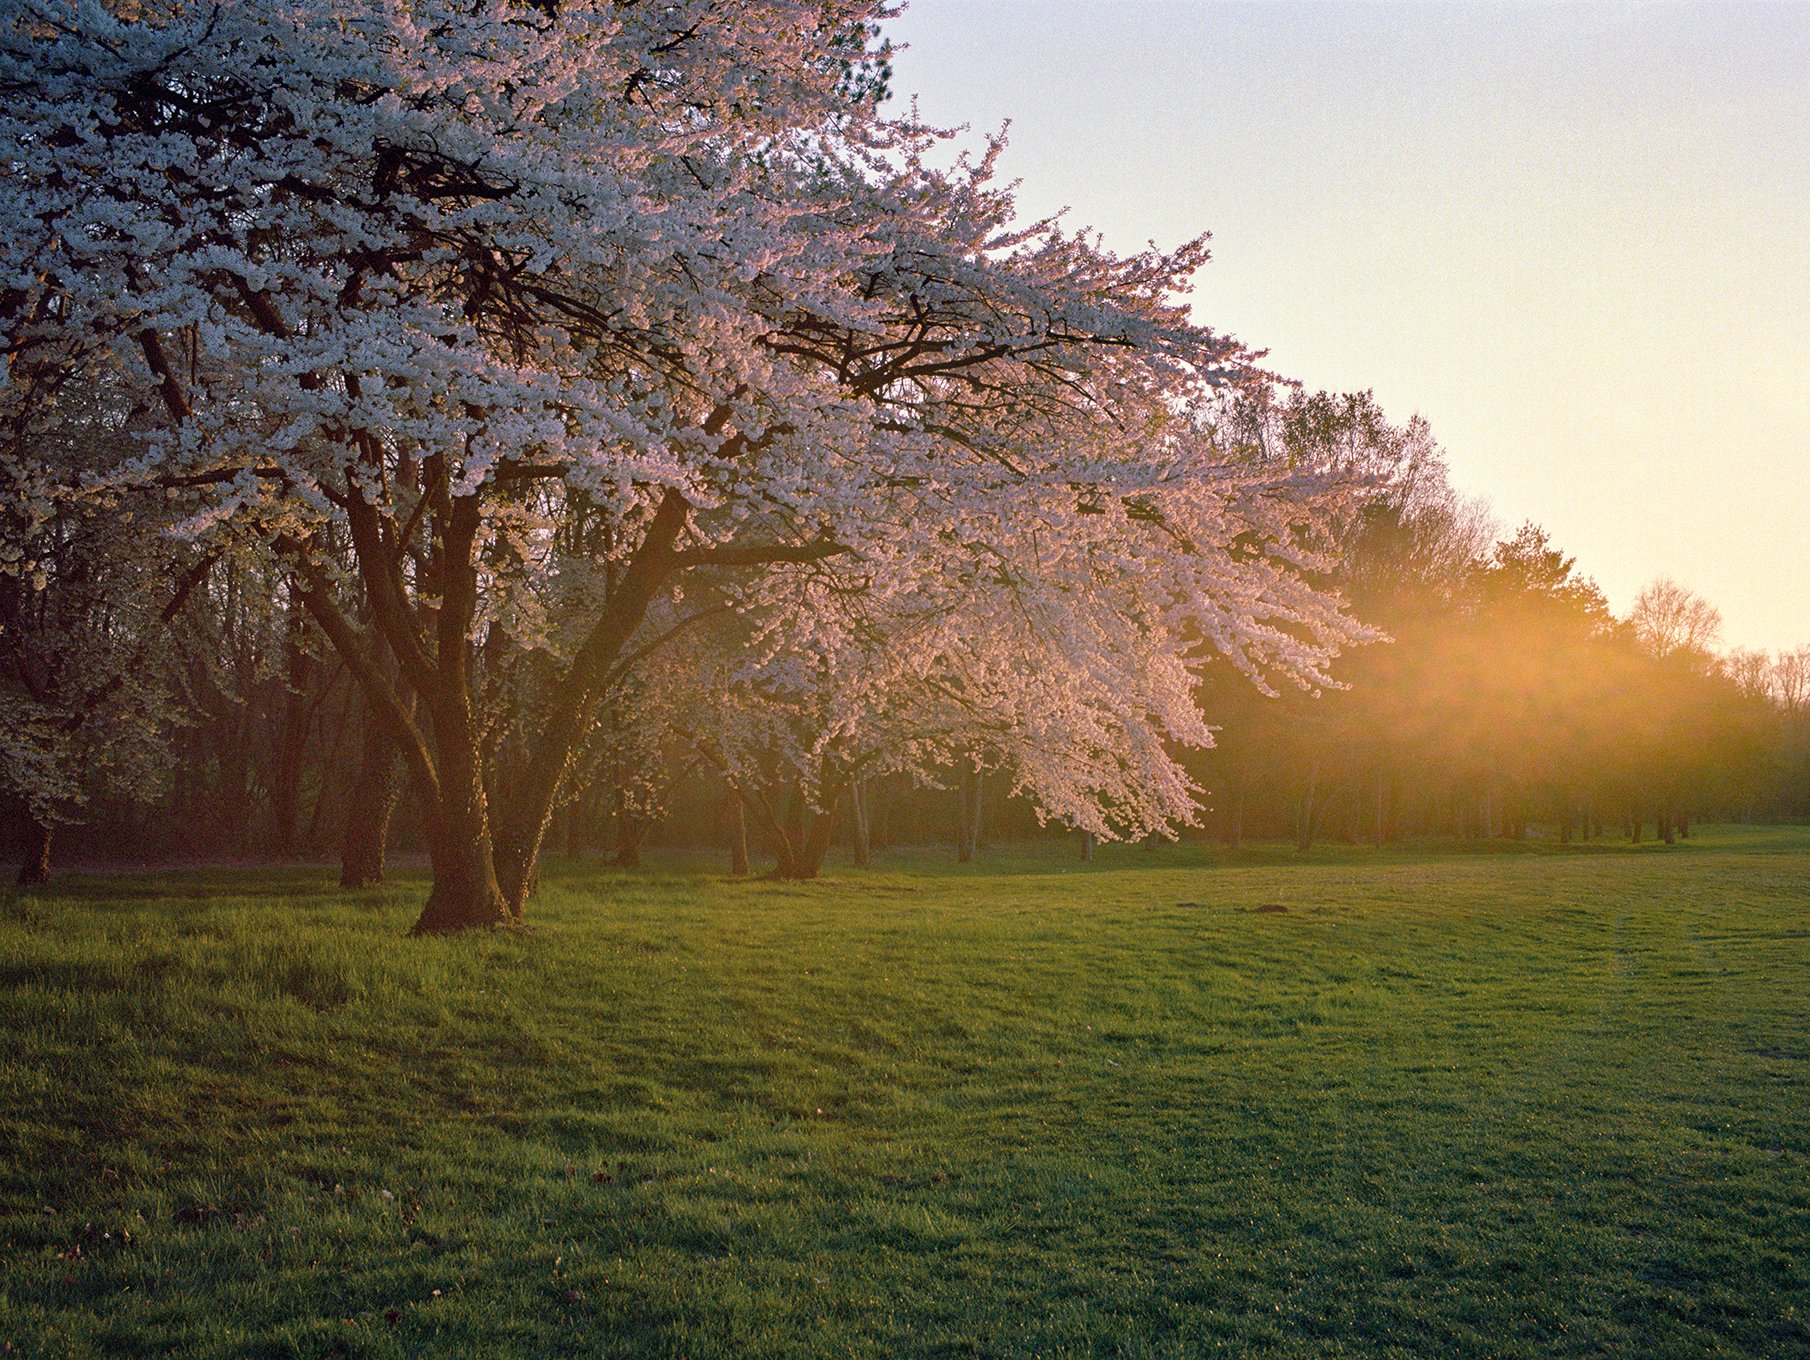   Cherry trees at sunset,  March 2021  